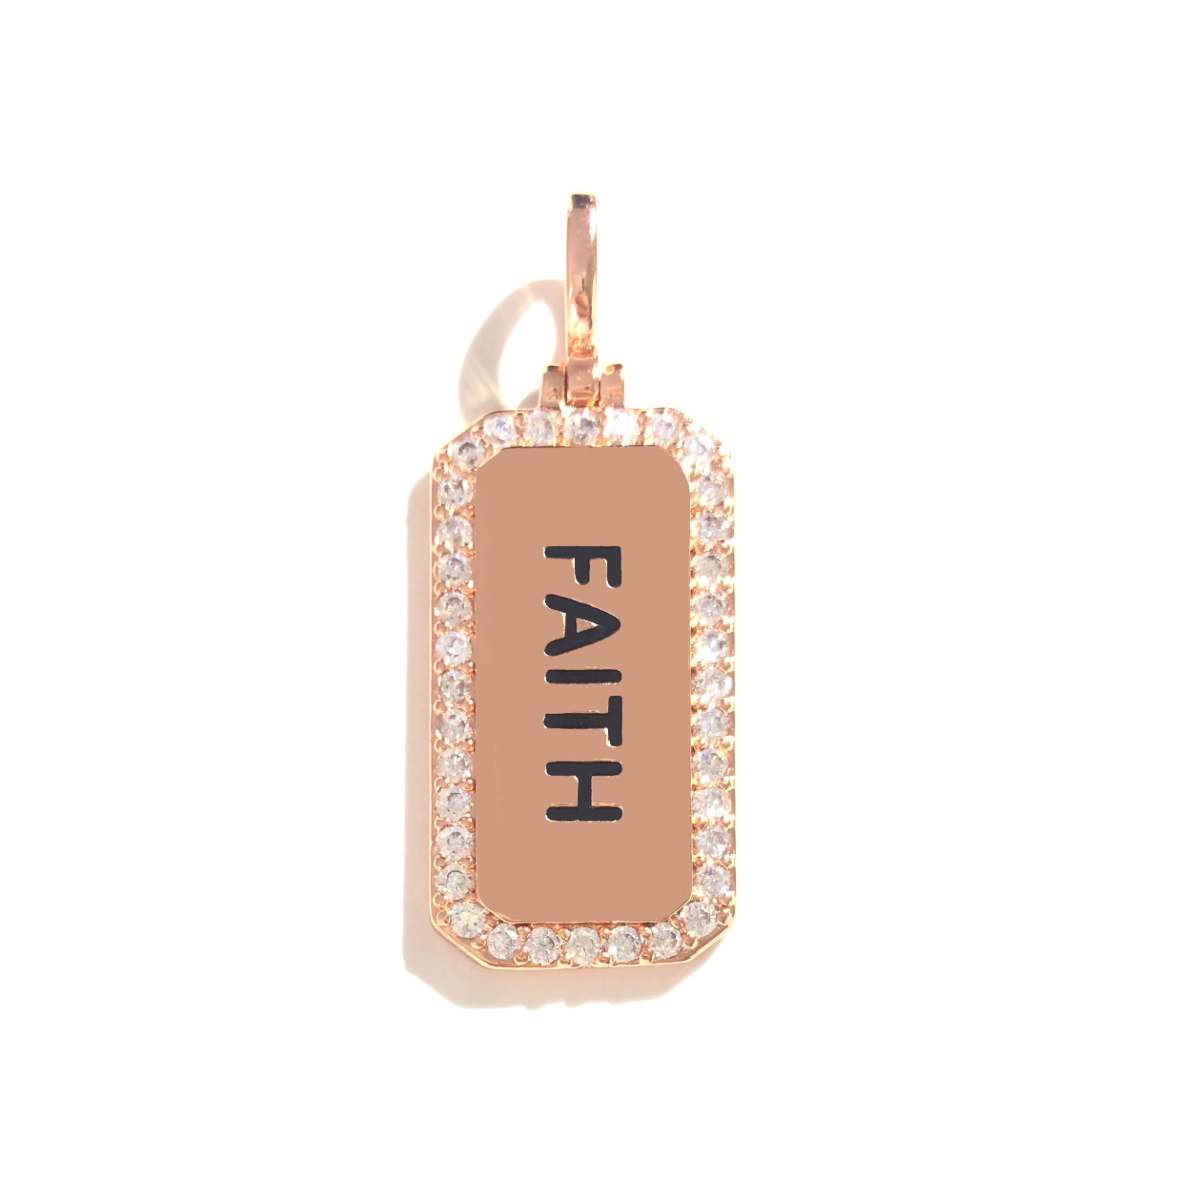 10pcs/lot 38*15mm CZ Paved Faith Word Tags Charms Pendants Rose Gold CZ Paved Charms Christian Quotes New Charms Arrivals Word Tags Charms Beads Beyond